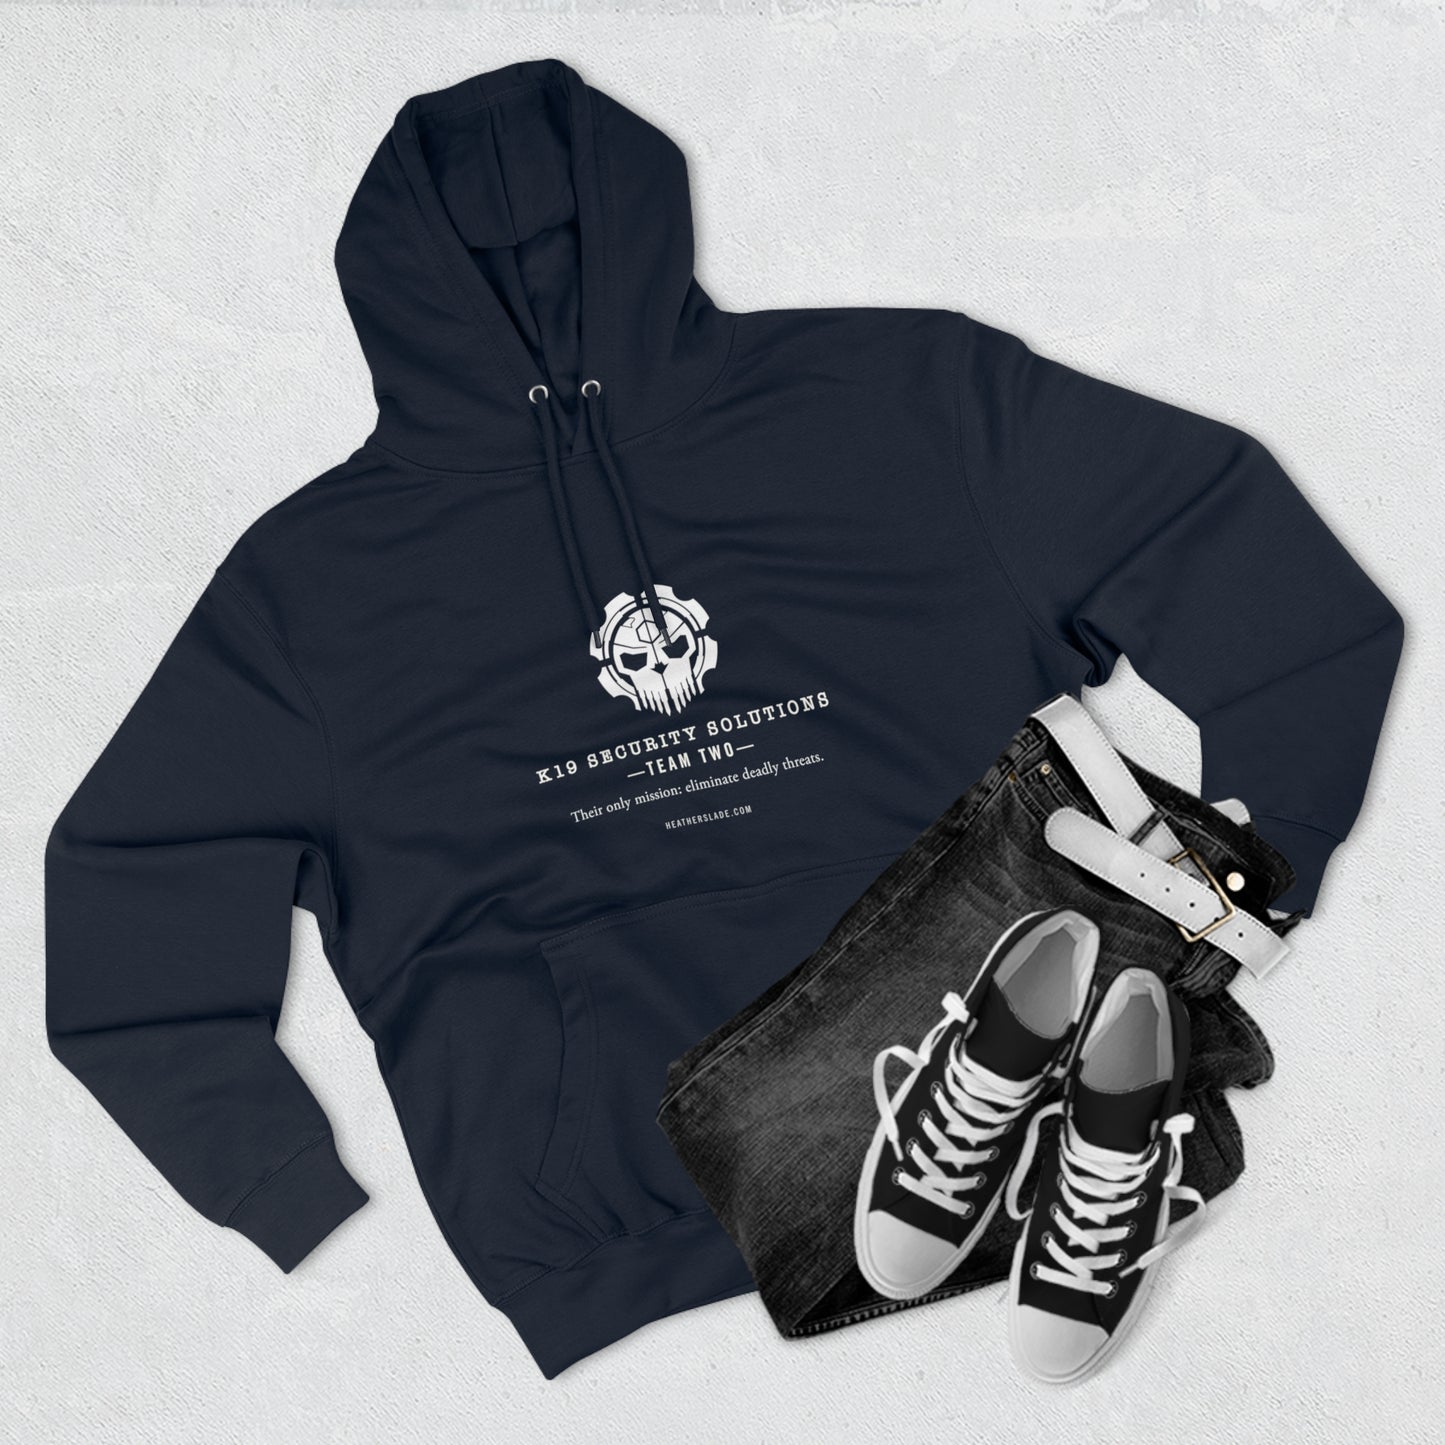 K19 Security Solutions Team Two Pullover Hoodie